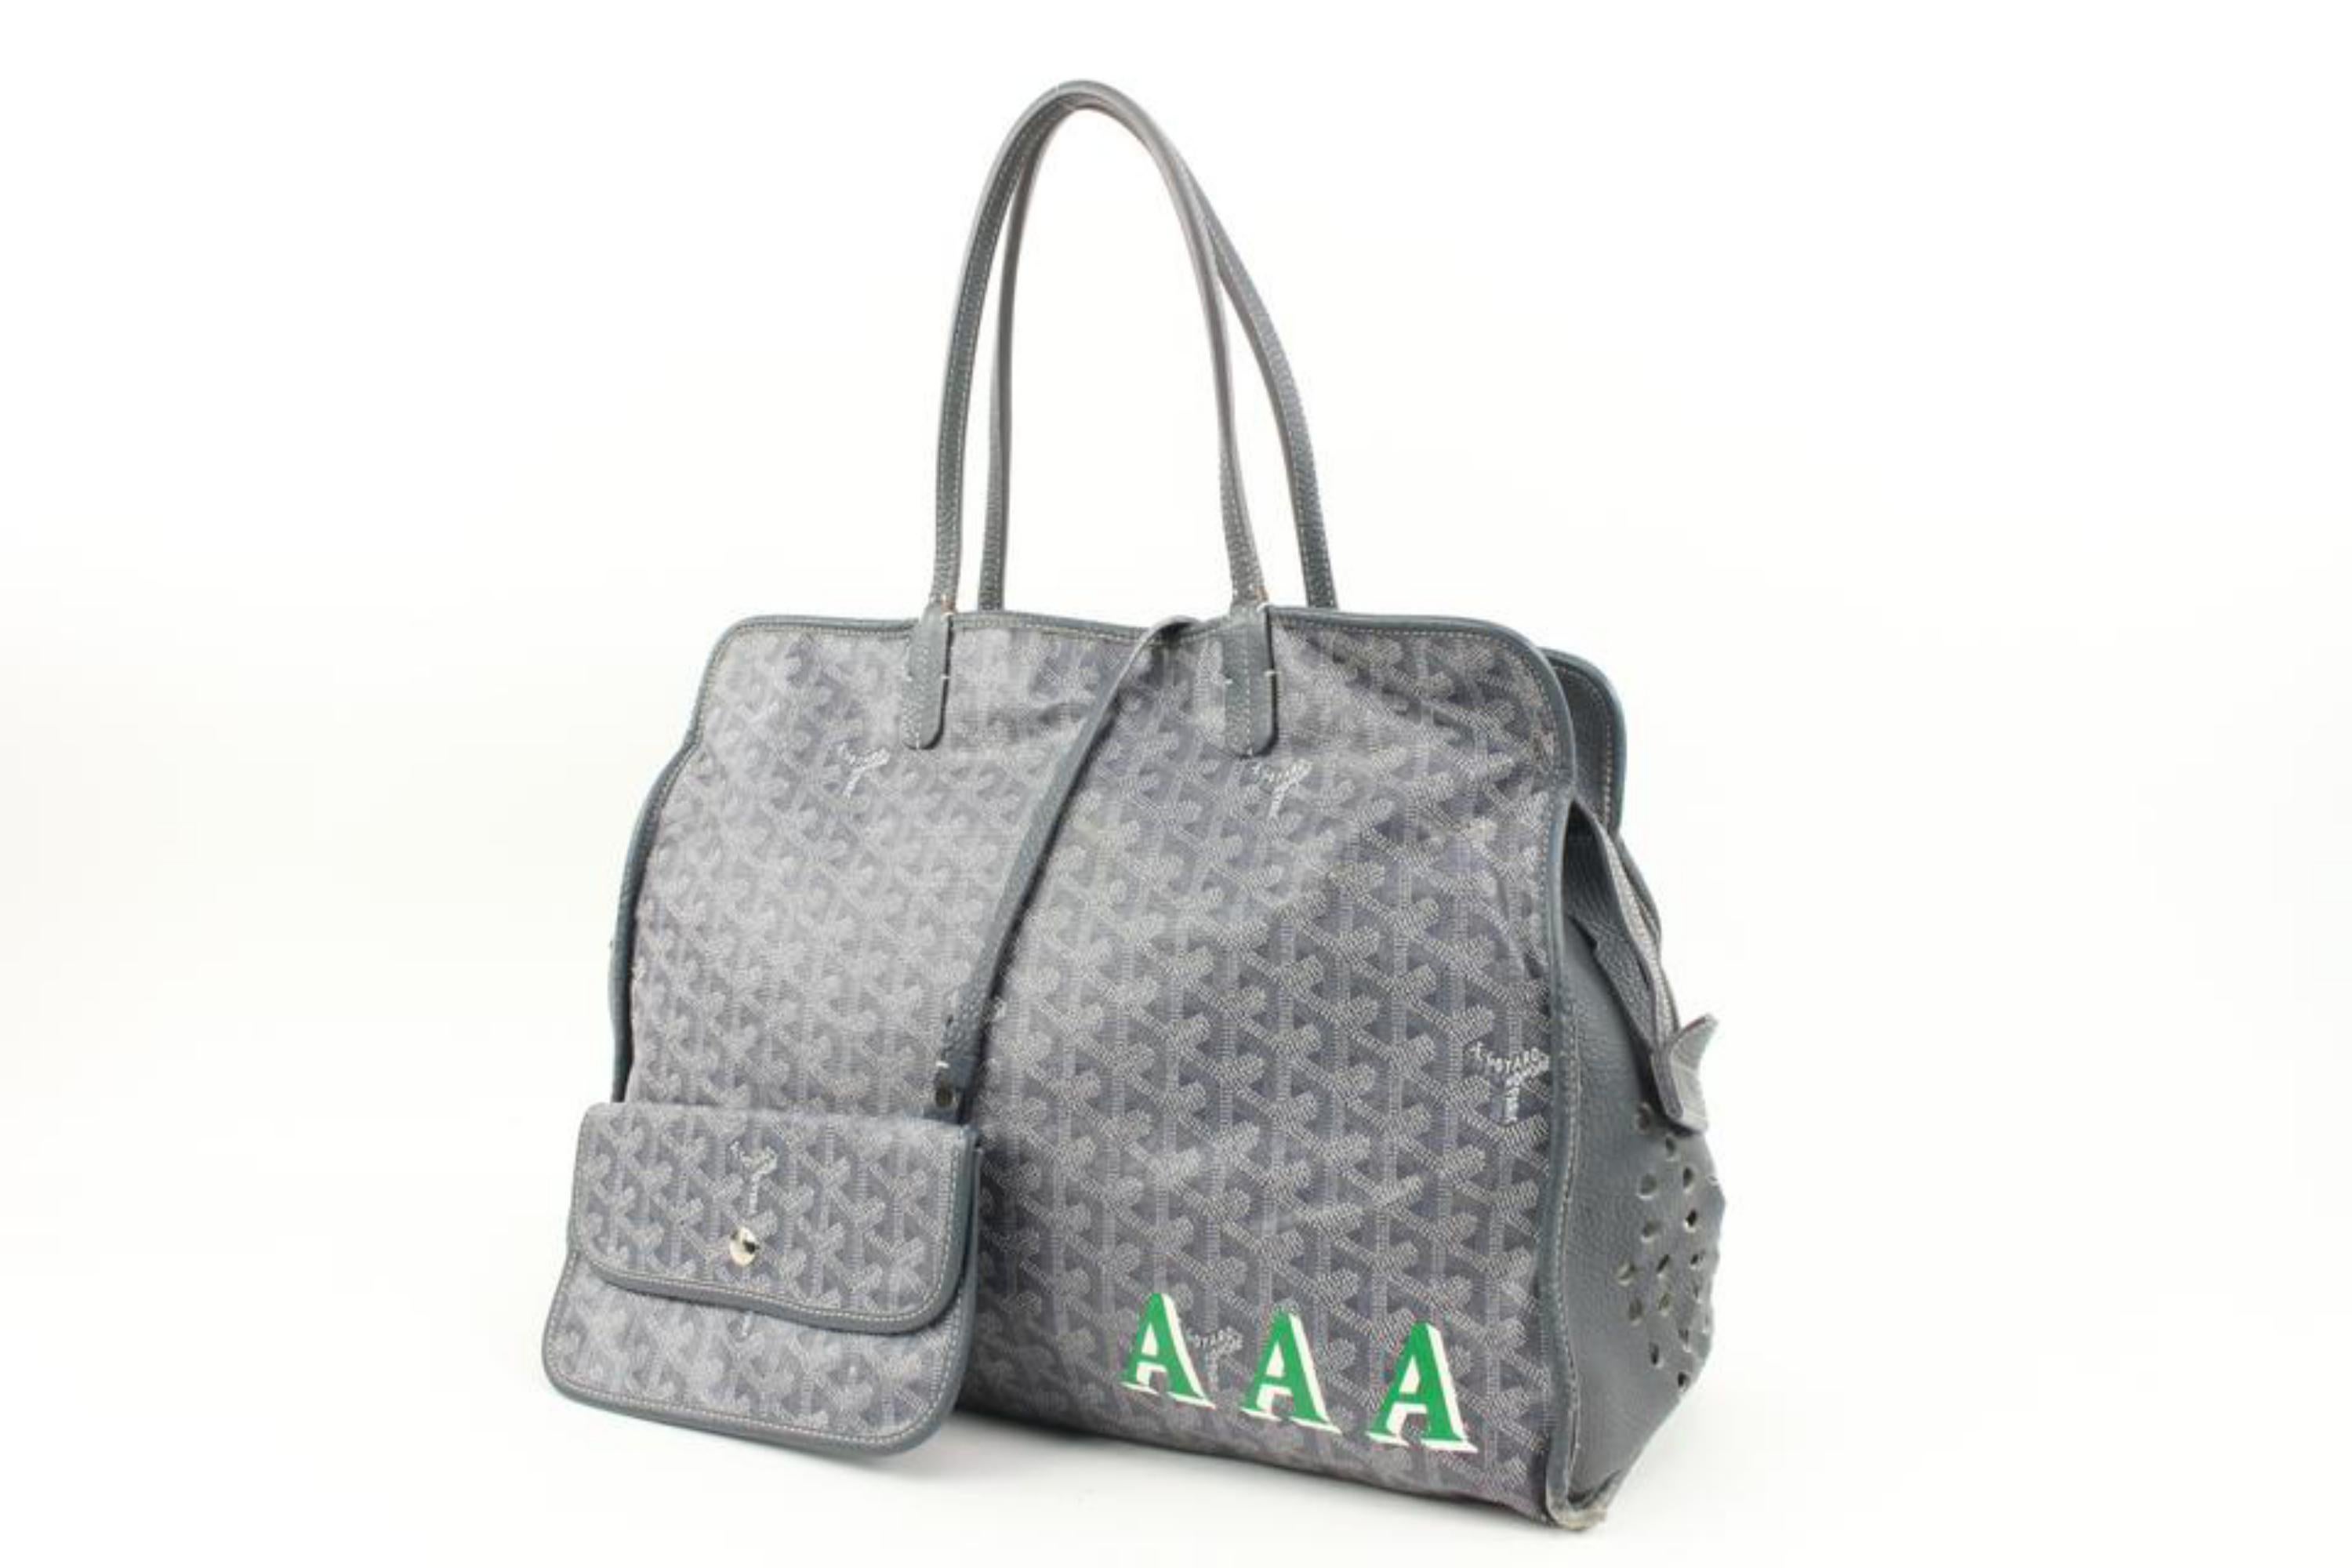 Goyard Grey Sac Hardy PM Dog Carrier Pet Bag with Pouch 13gy222s
Date Code/Serial Number: LUY120121
Made In: France
Measurements: Length:  16